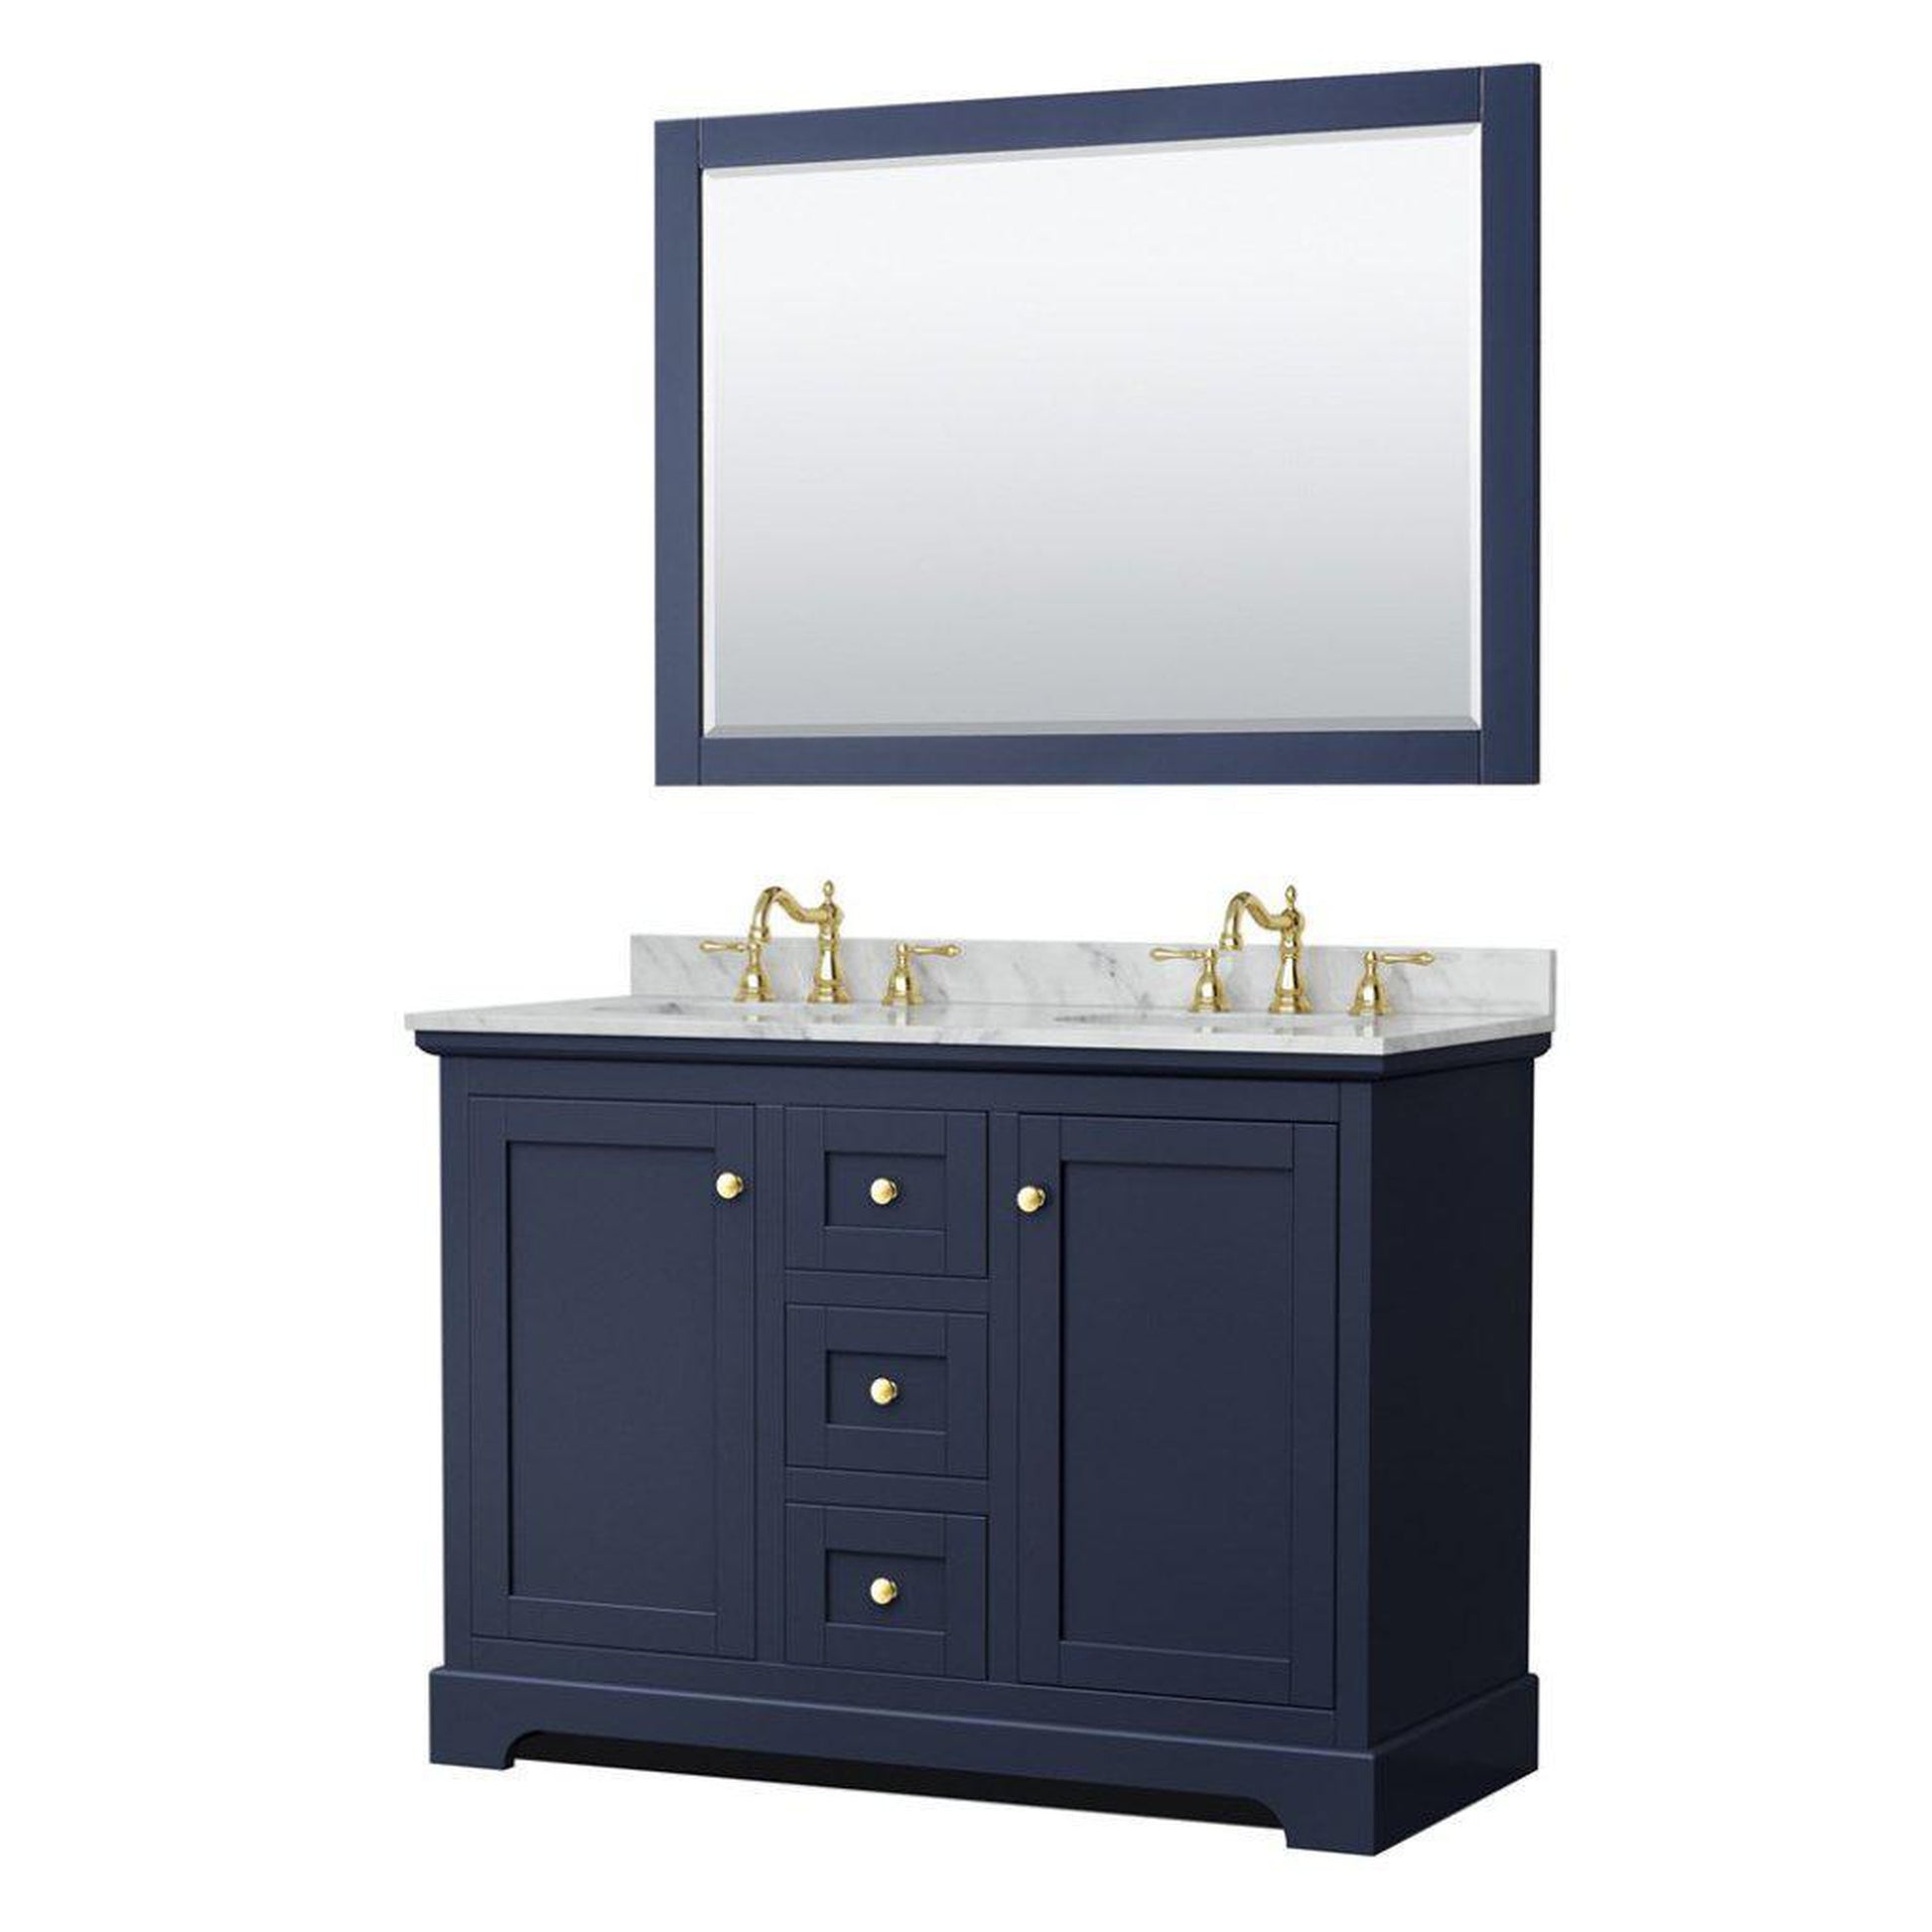 Wyndham Collection Avery 48" Dark Blue Double Bathroom Vanity Set With White Carrara Marble Countertop With 3-Hole Faucet And 8" Oval Sink And 46" Mirror